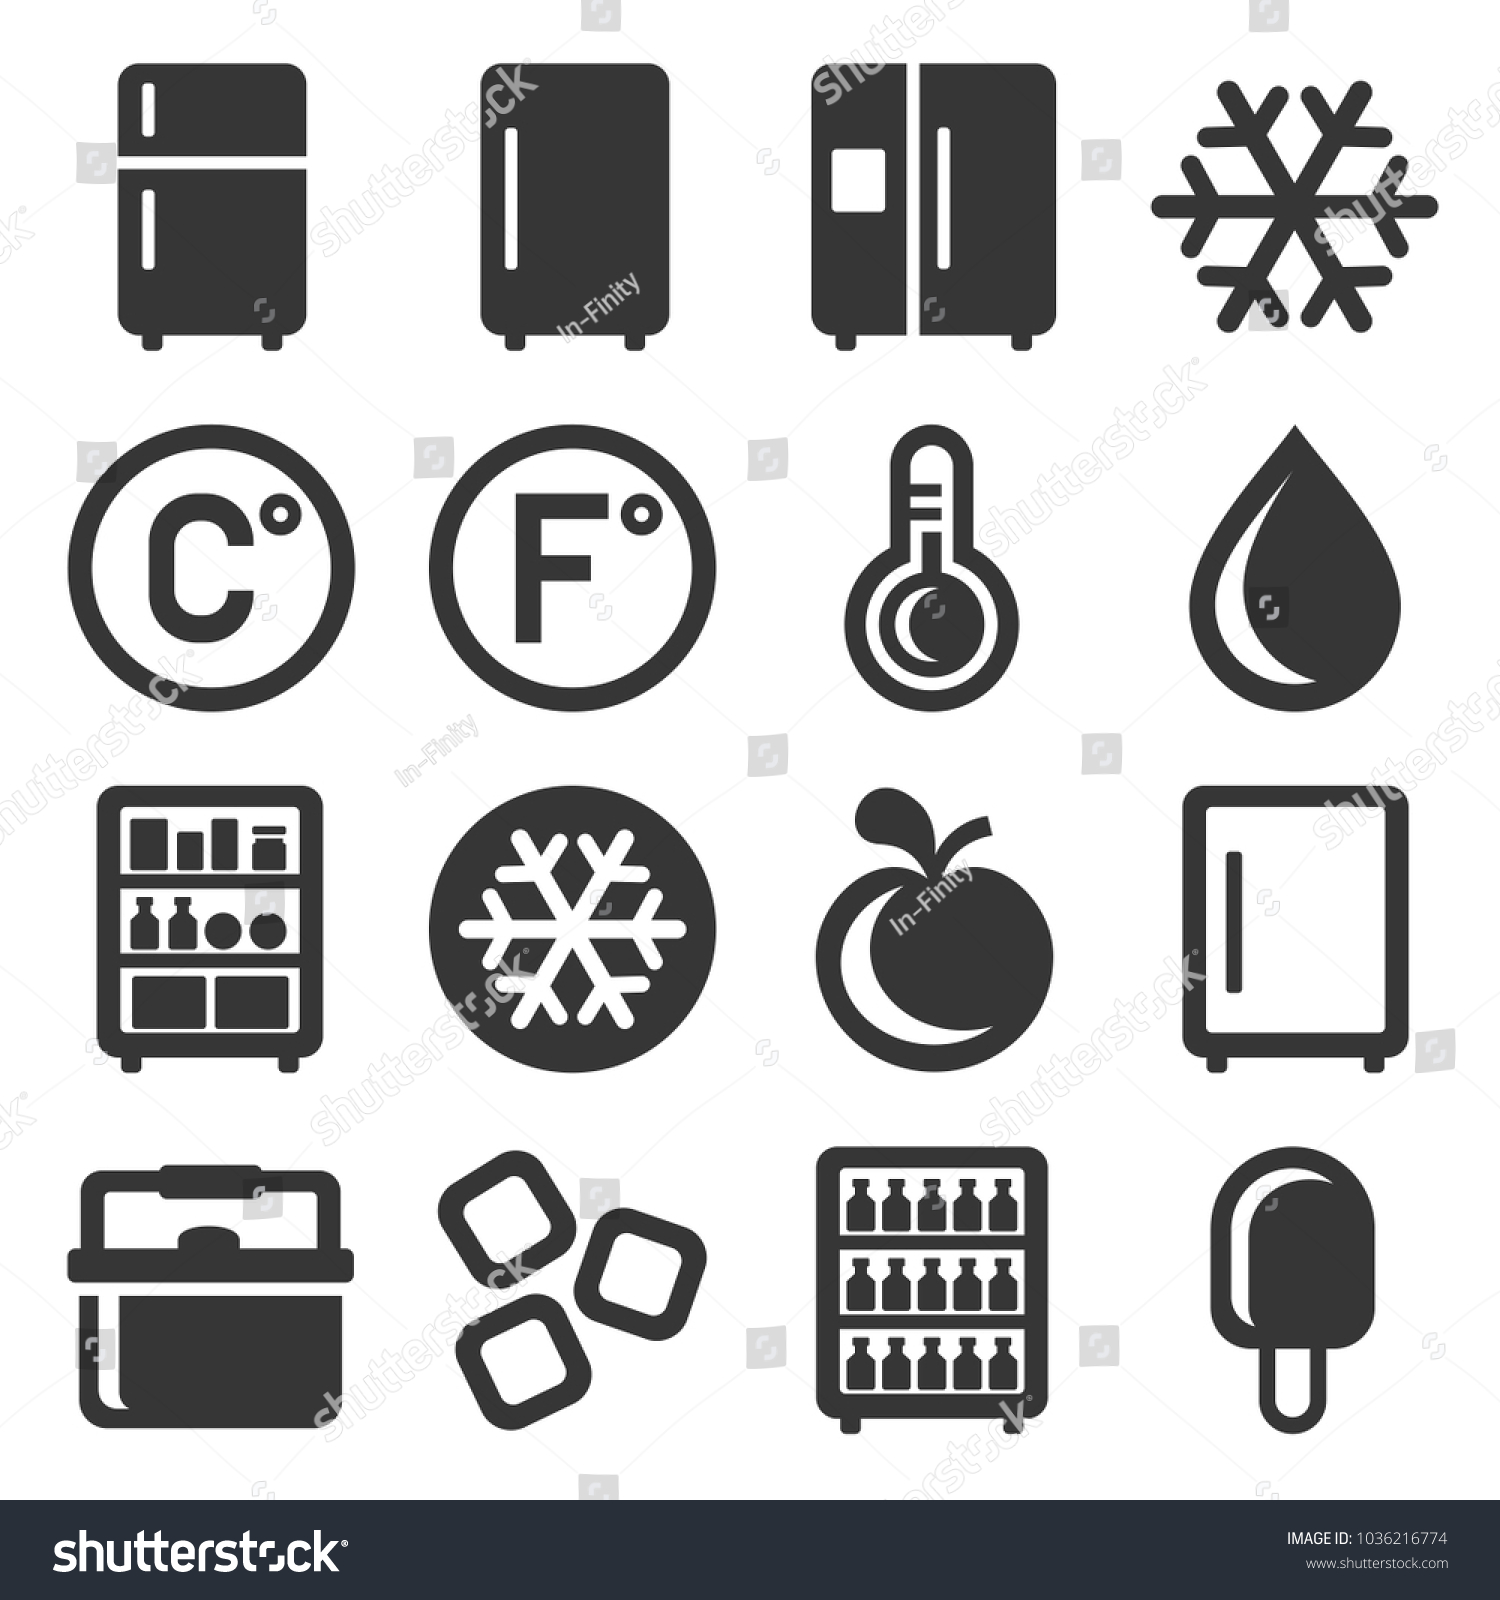 SVG of Refrigerator Icons Set on White Background. Vector svg